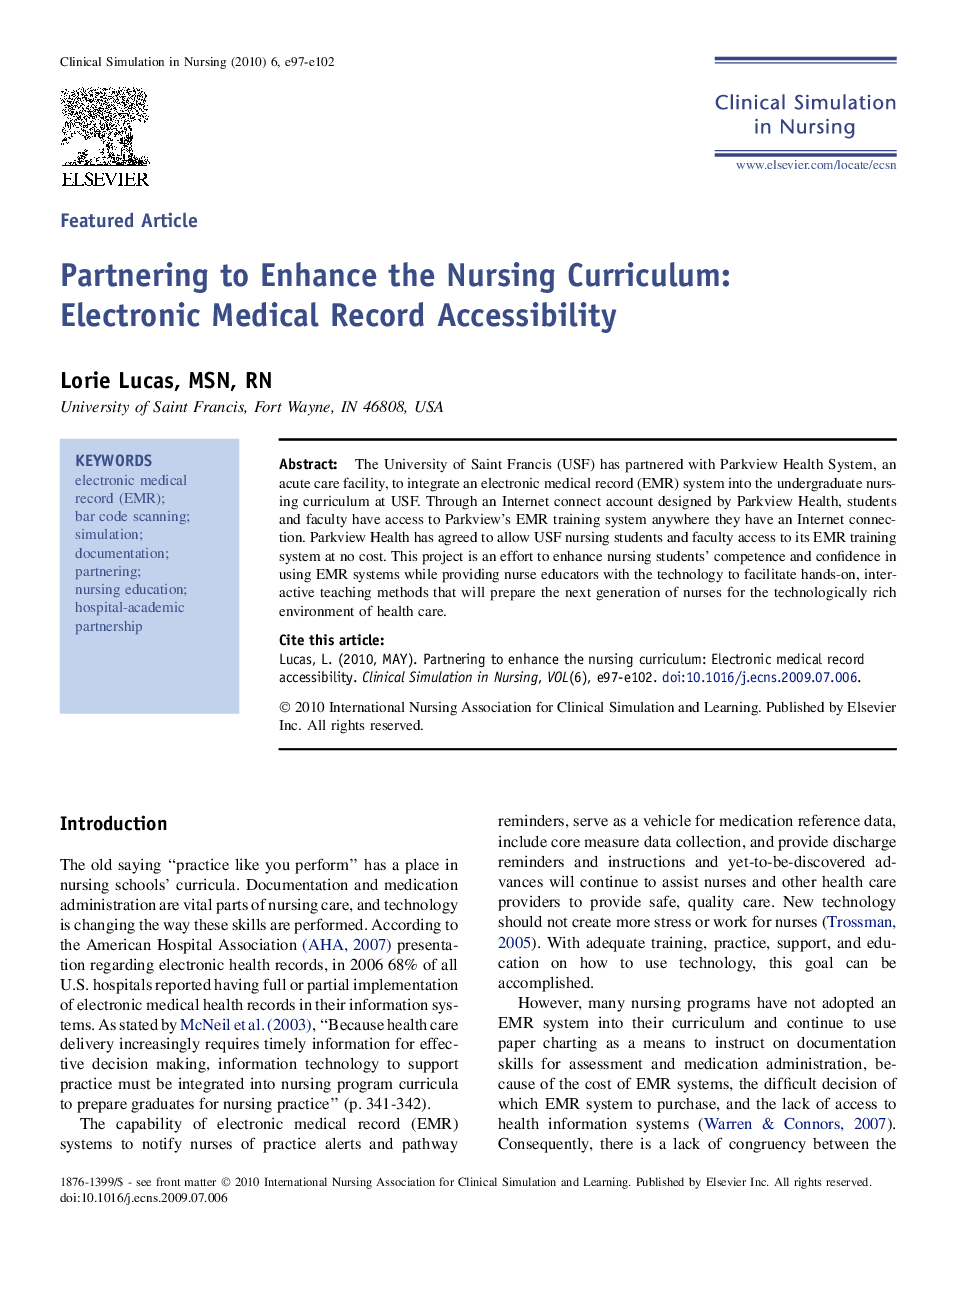 Partnering to Enhance the Nursing Curriculum: Electronic Medical Record Accessibility 